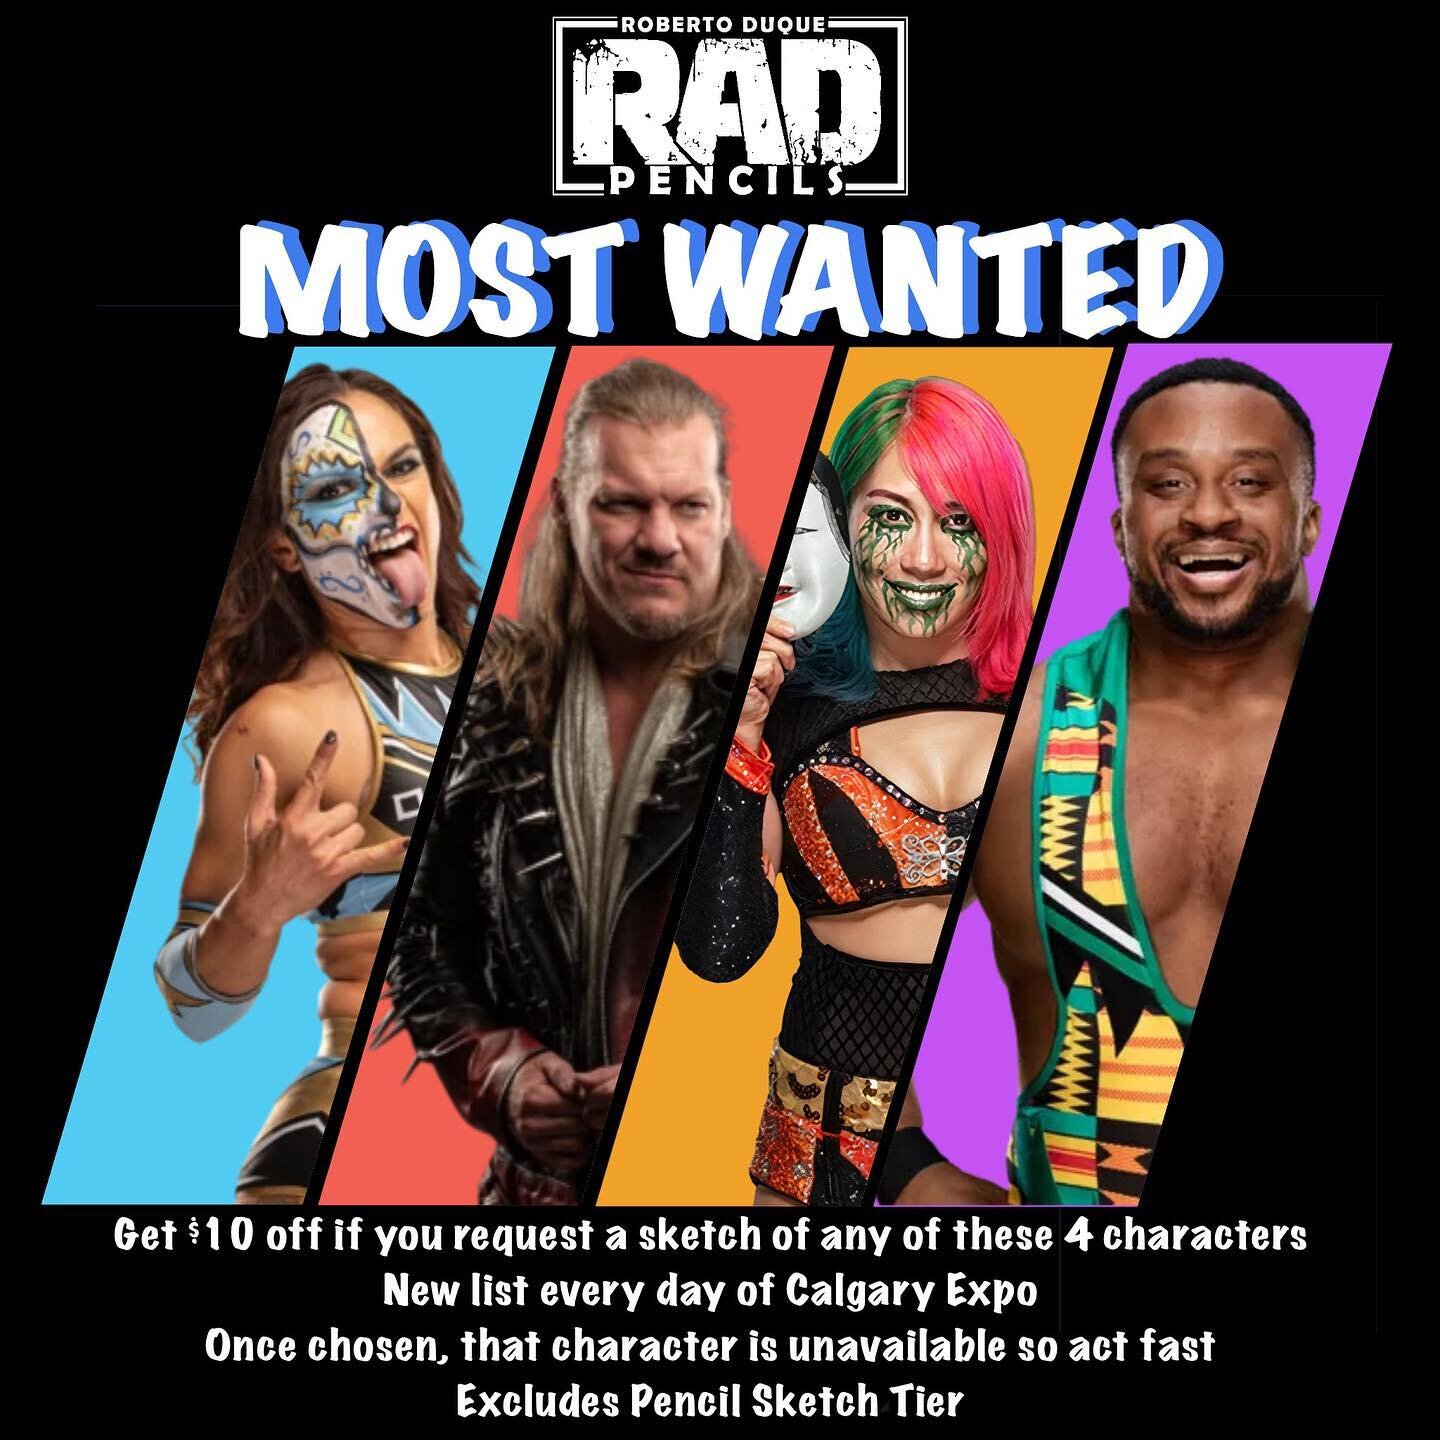 It&rsquo;s Friday, you know what that means. It&rsquo;s another Most Wanted list. Today I&rsquo;m bringing the war to my table with #aew vs #wwe sketches. Be the first to request a sketch of #thunderrosa #chrisjericho #asuka or #bige for a $10 discou